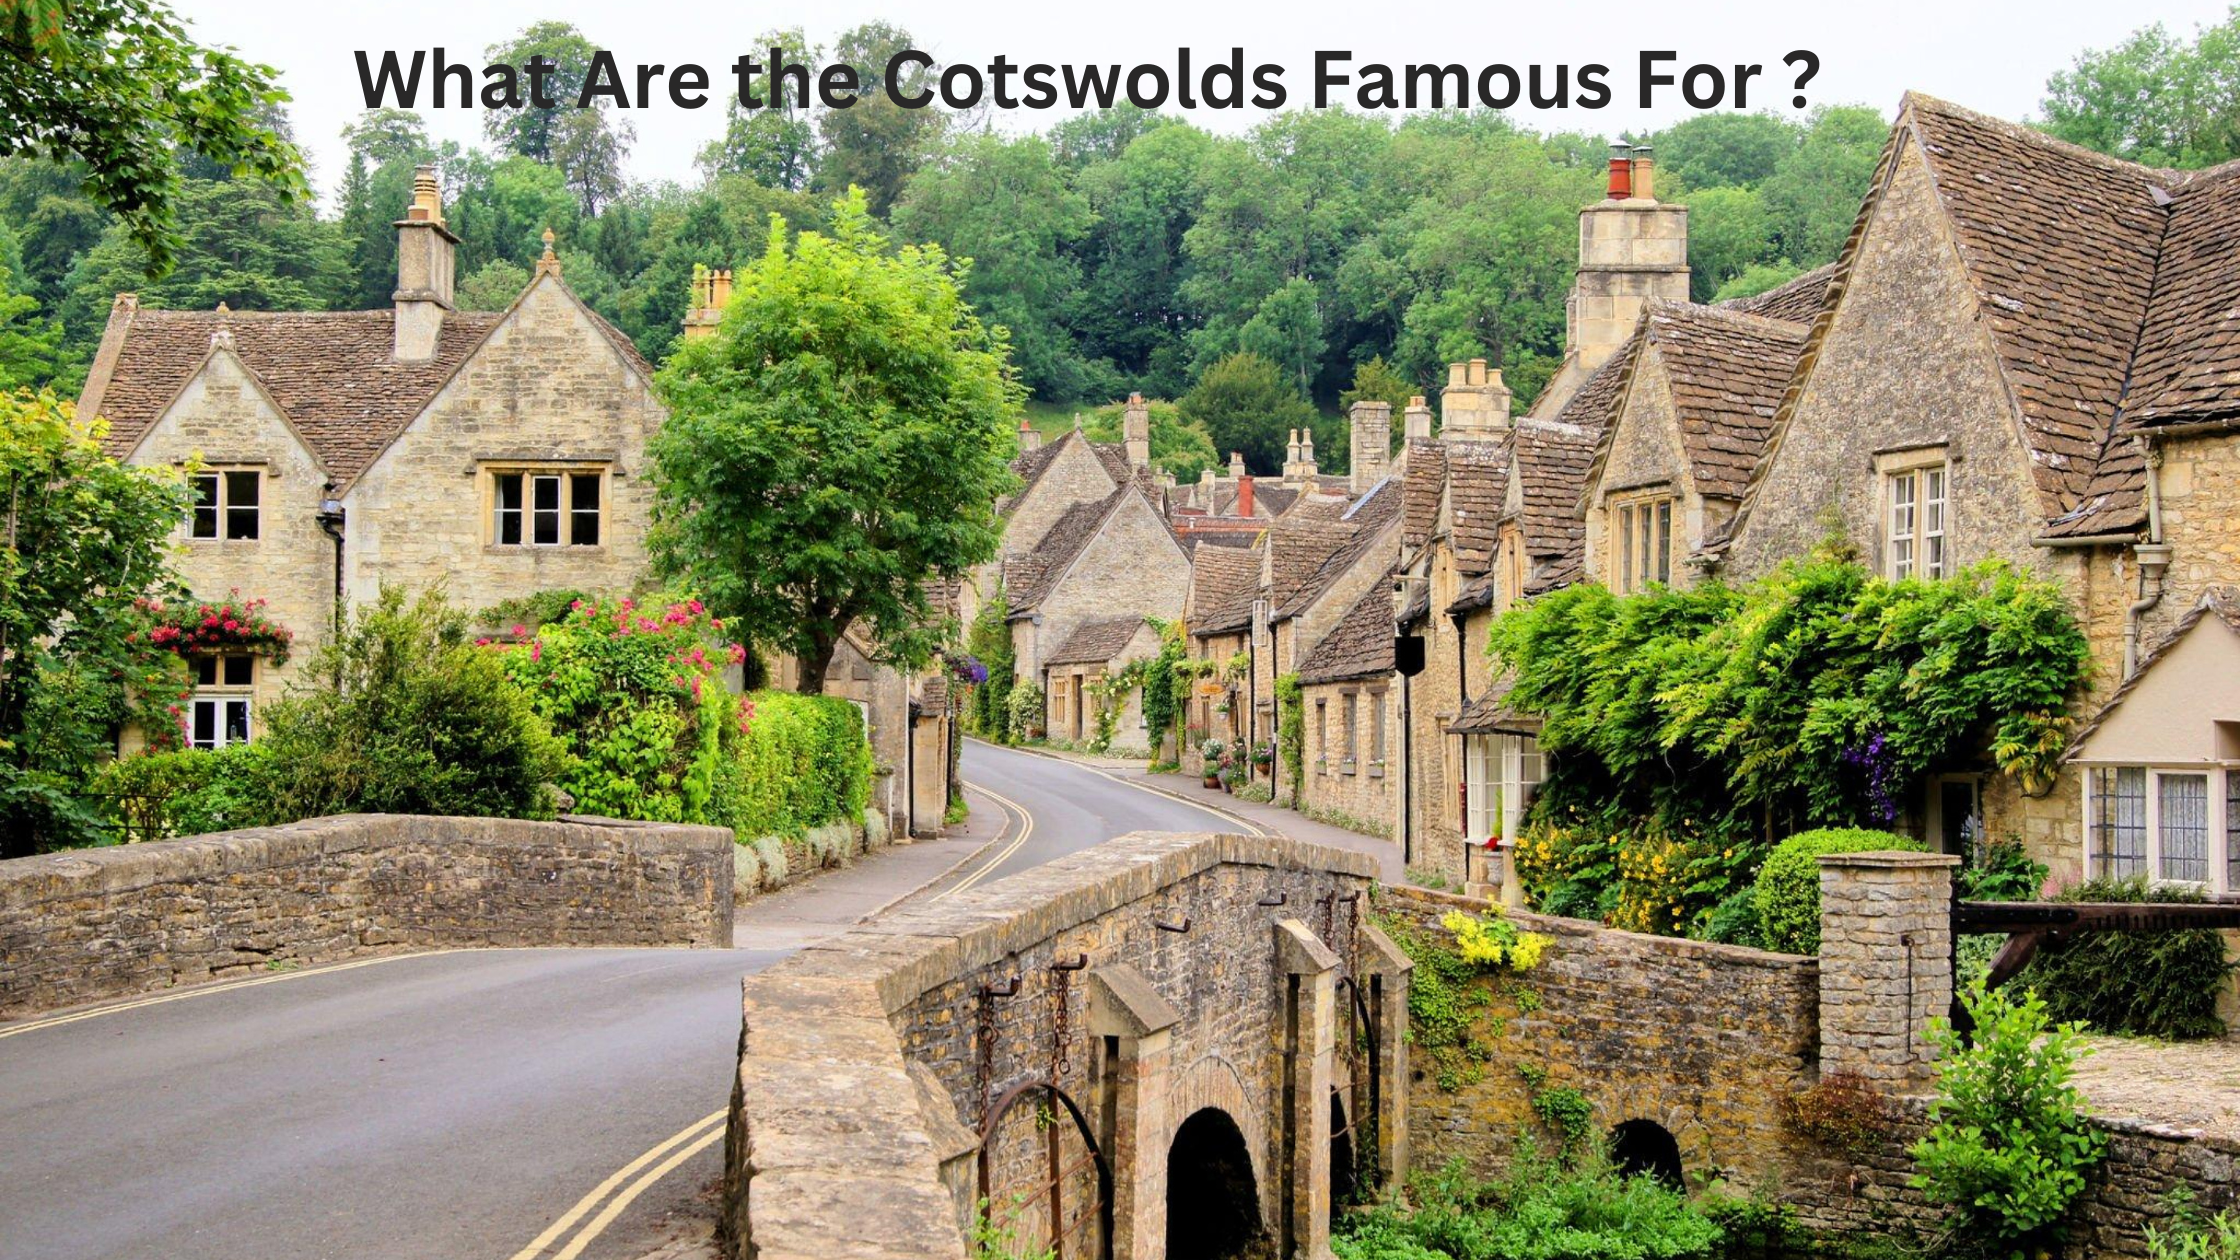 What Are the Cotswolds Famous For